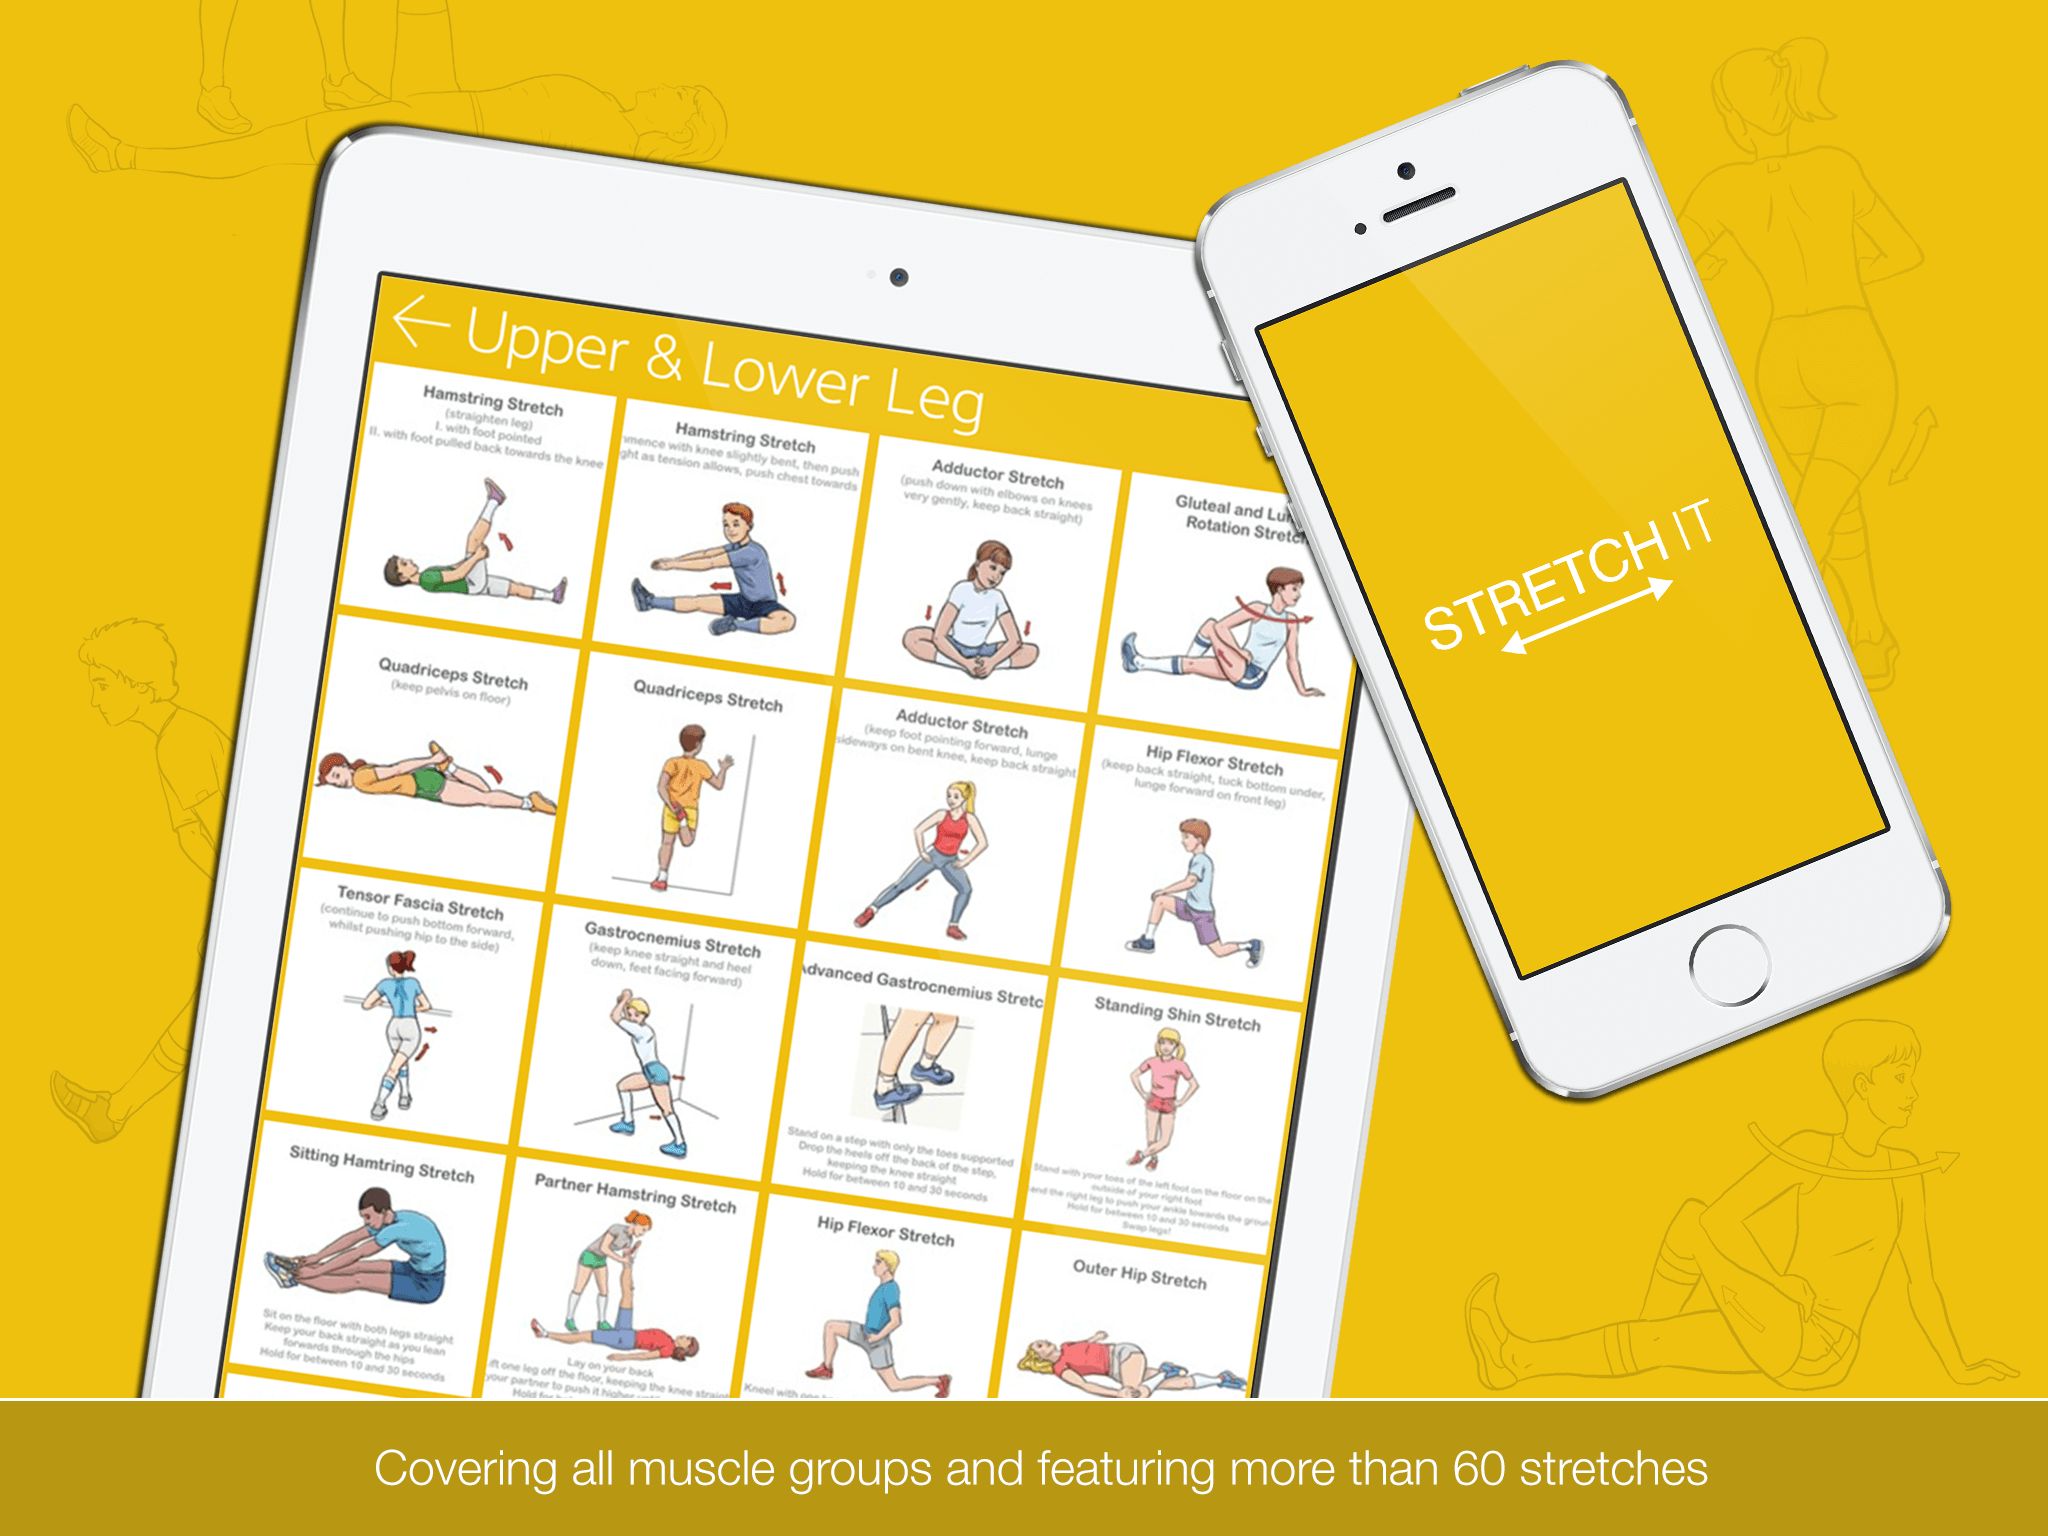 Stretch It - Stretching, Warm Up & Cool Down Task Cards - The P.E Geek